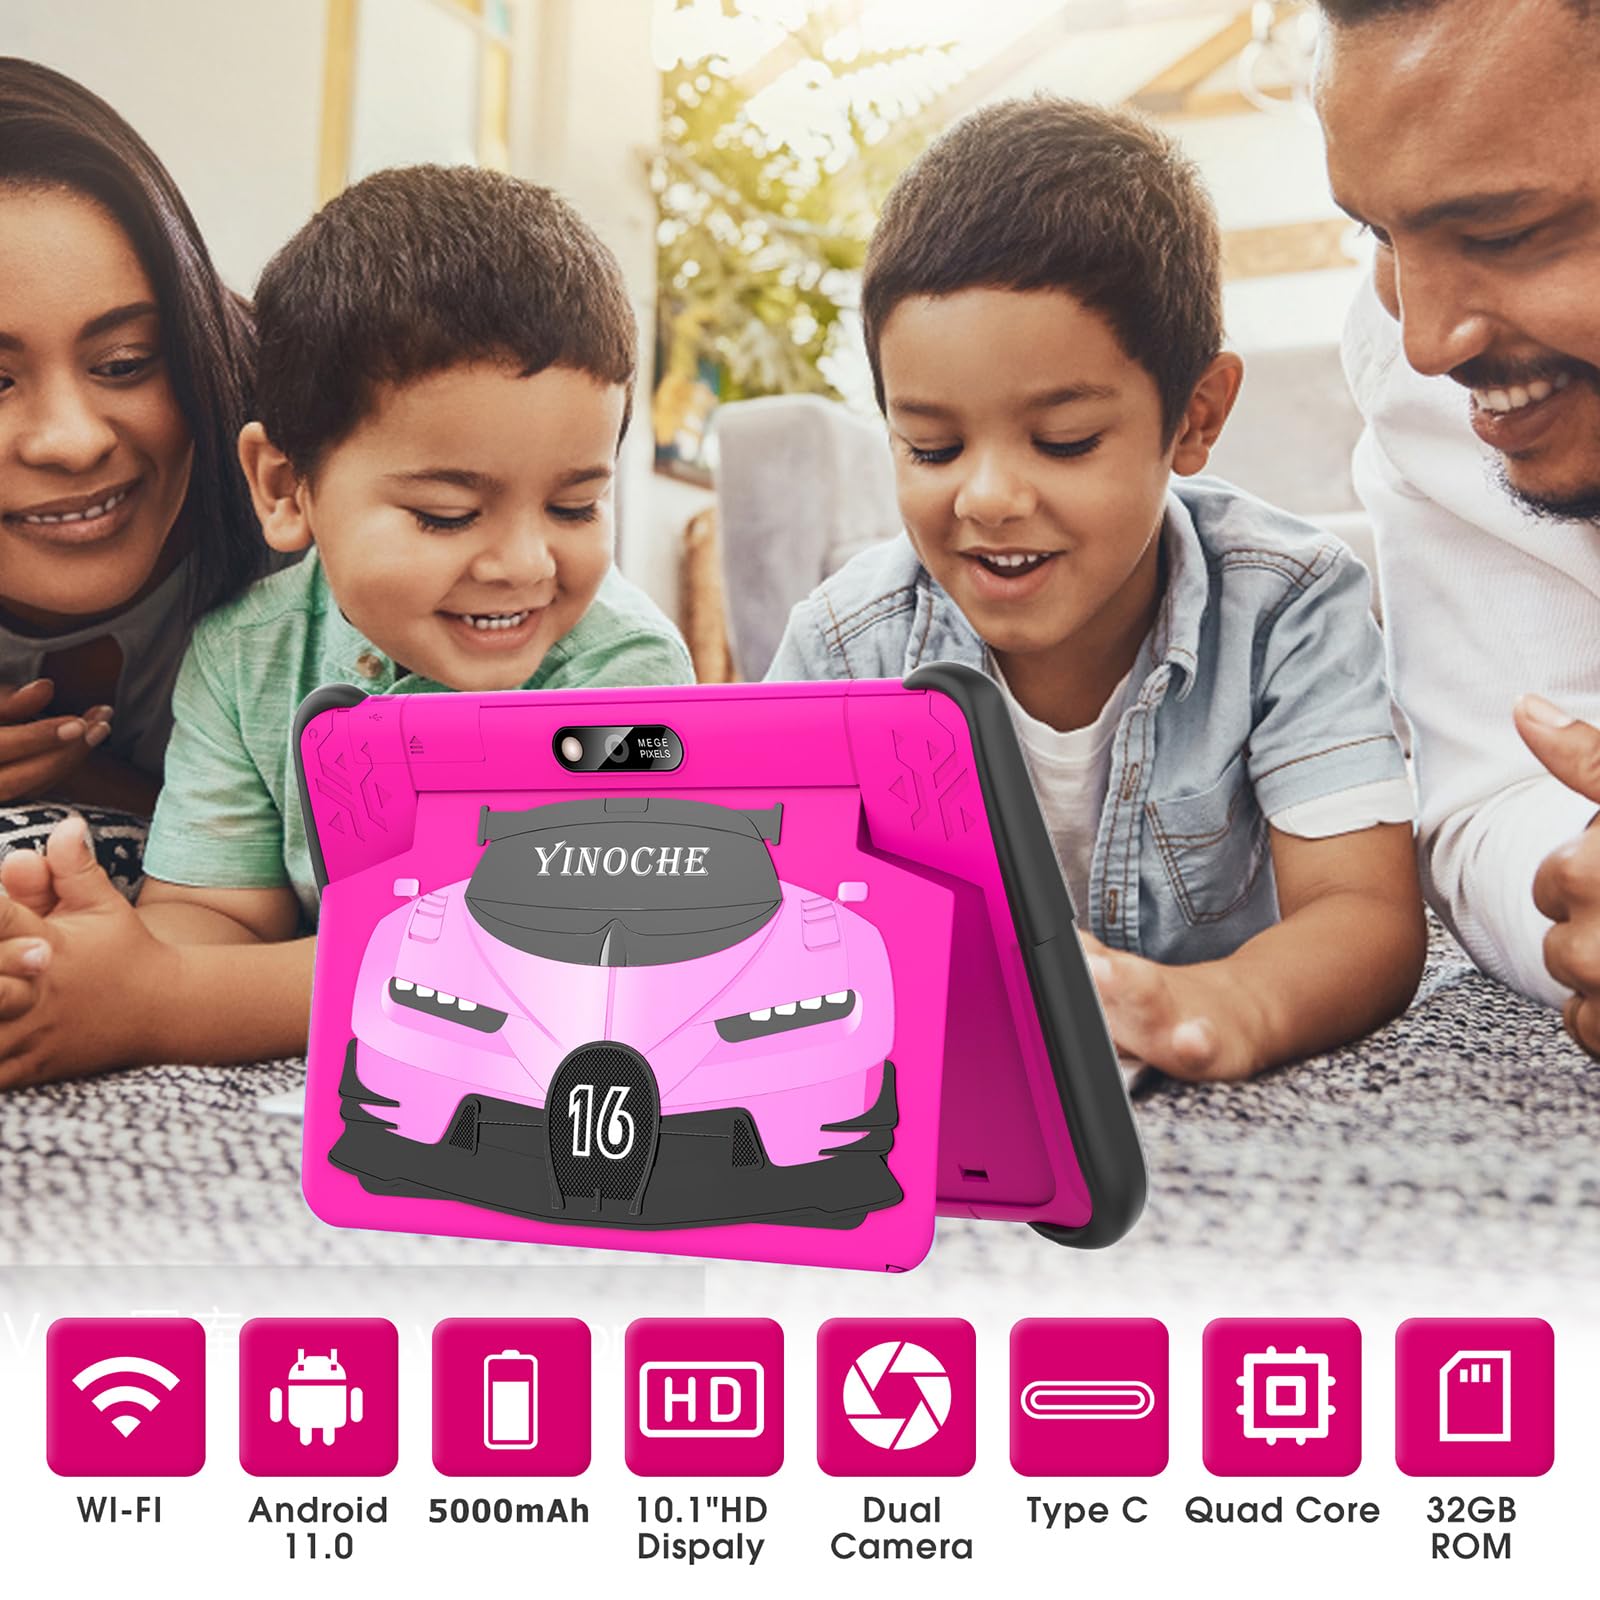 YINOCHE Kids Tablet 10 inch with Case Included Toddler Tablet for Kids WiFi Chindren's Tablet Android Kids Tablets for Toddlers 32G Parental Control Support YouTube Netflix for Boys Girls (Pink)